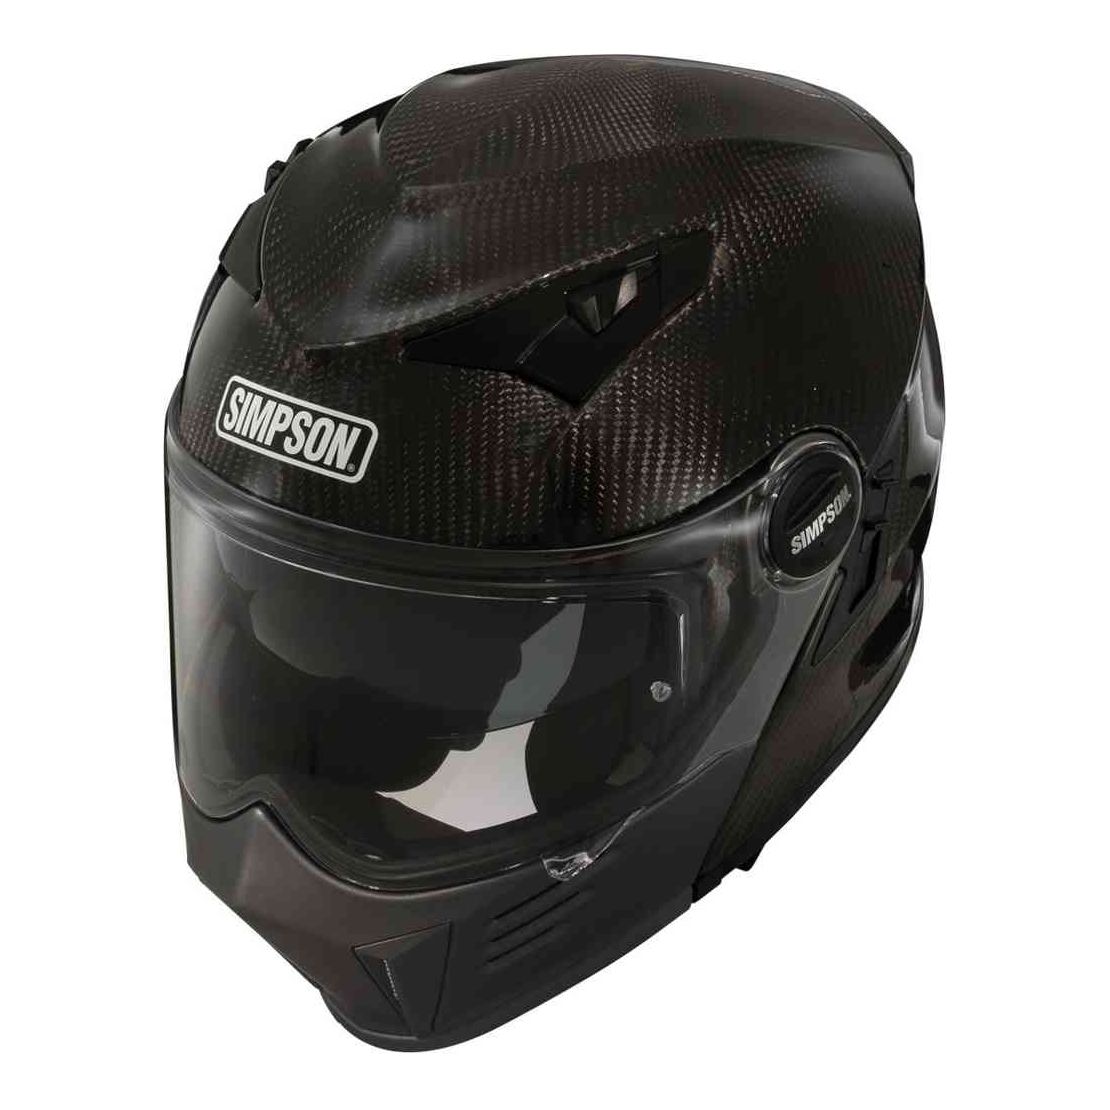 Image of Casque Simpson DARKSOME - CARBON